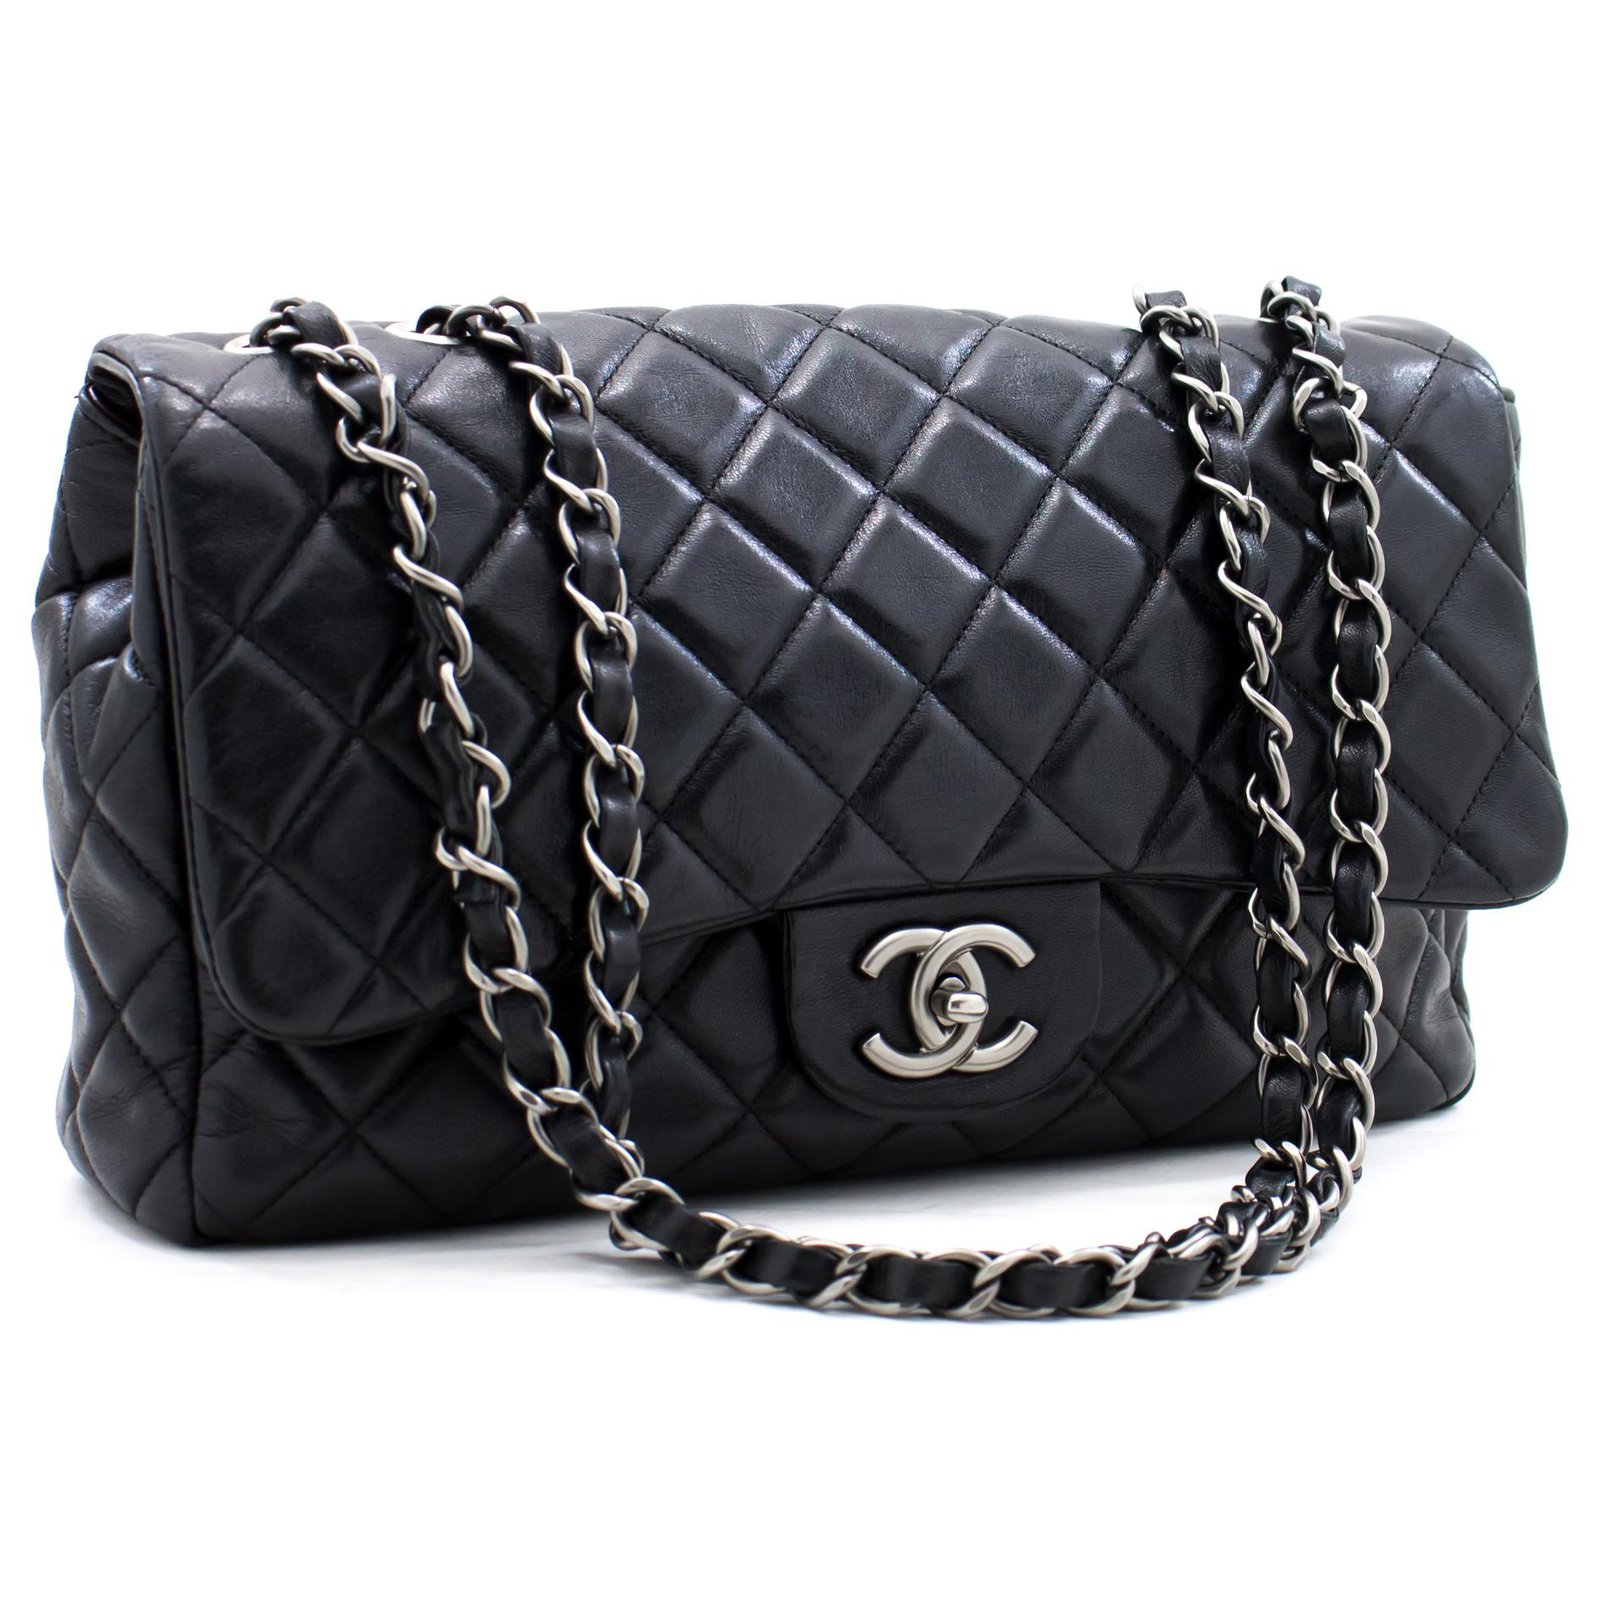 Chanel 2009 Single Flap Chain Shoulder Bag Black Quilted Leather